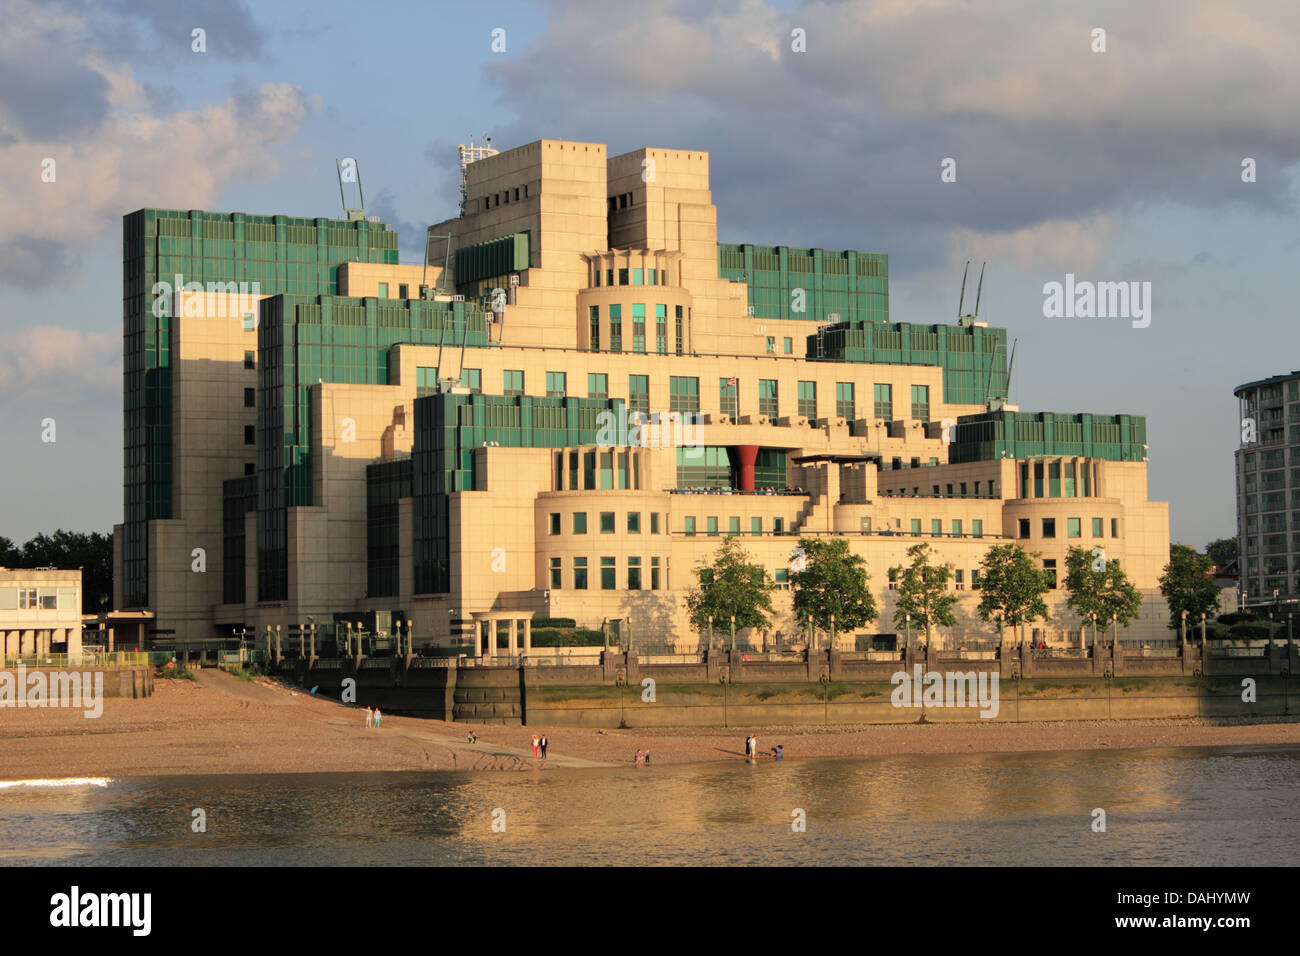 The SIS Building, known as the MI6 HQ Building at 85 Albert Embankment, Vauxhall Cross, London UK Stock Photo